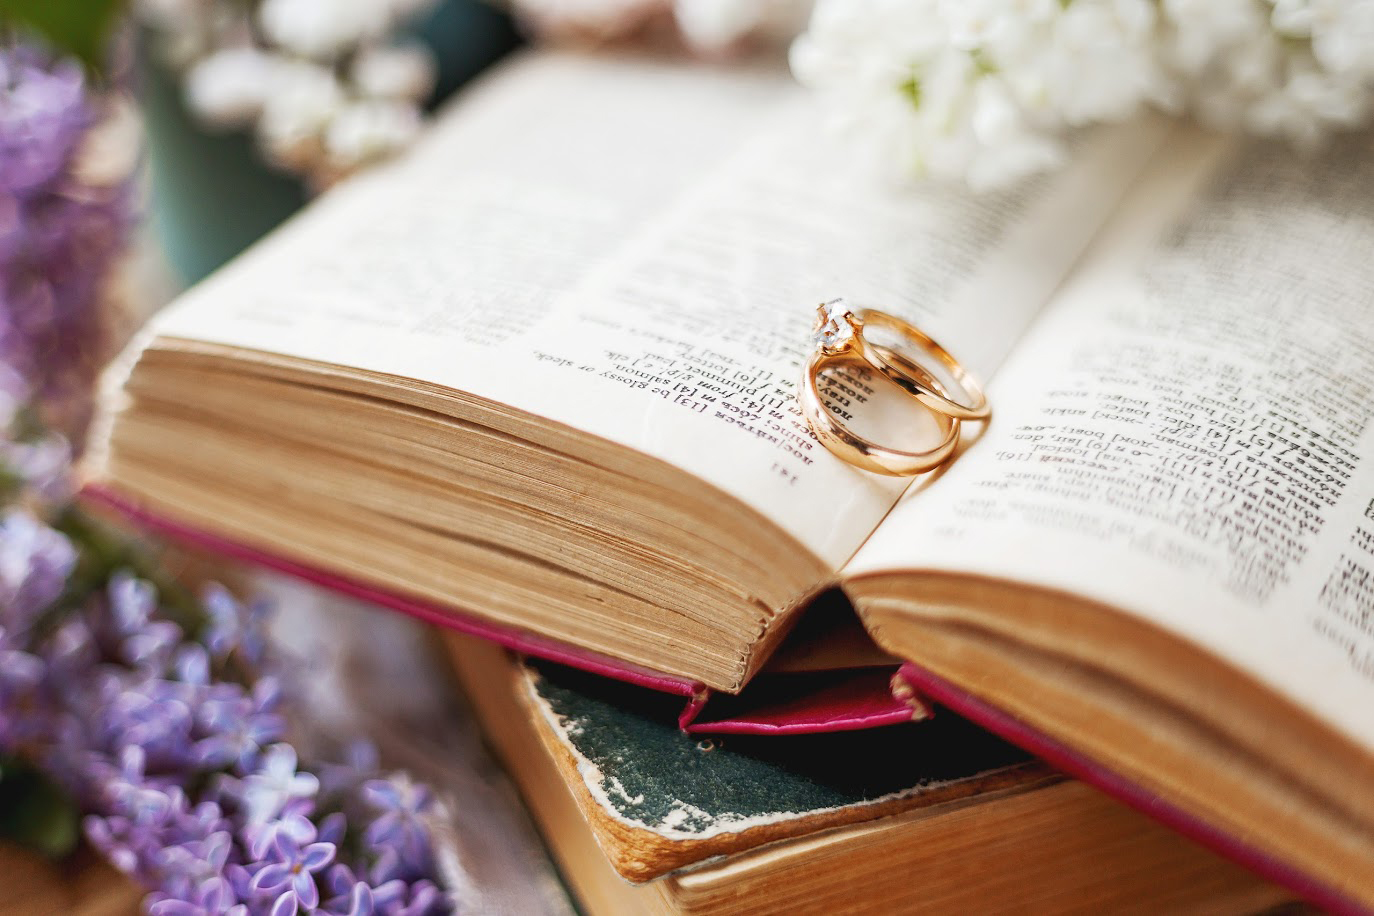 Pair of wedding rings with diamond. Rustic background with old books and lilac flowers. Retro background.